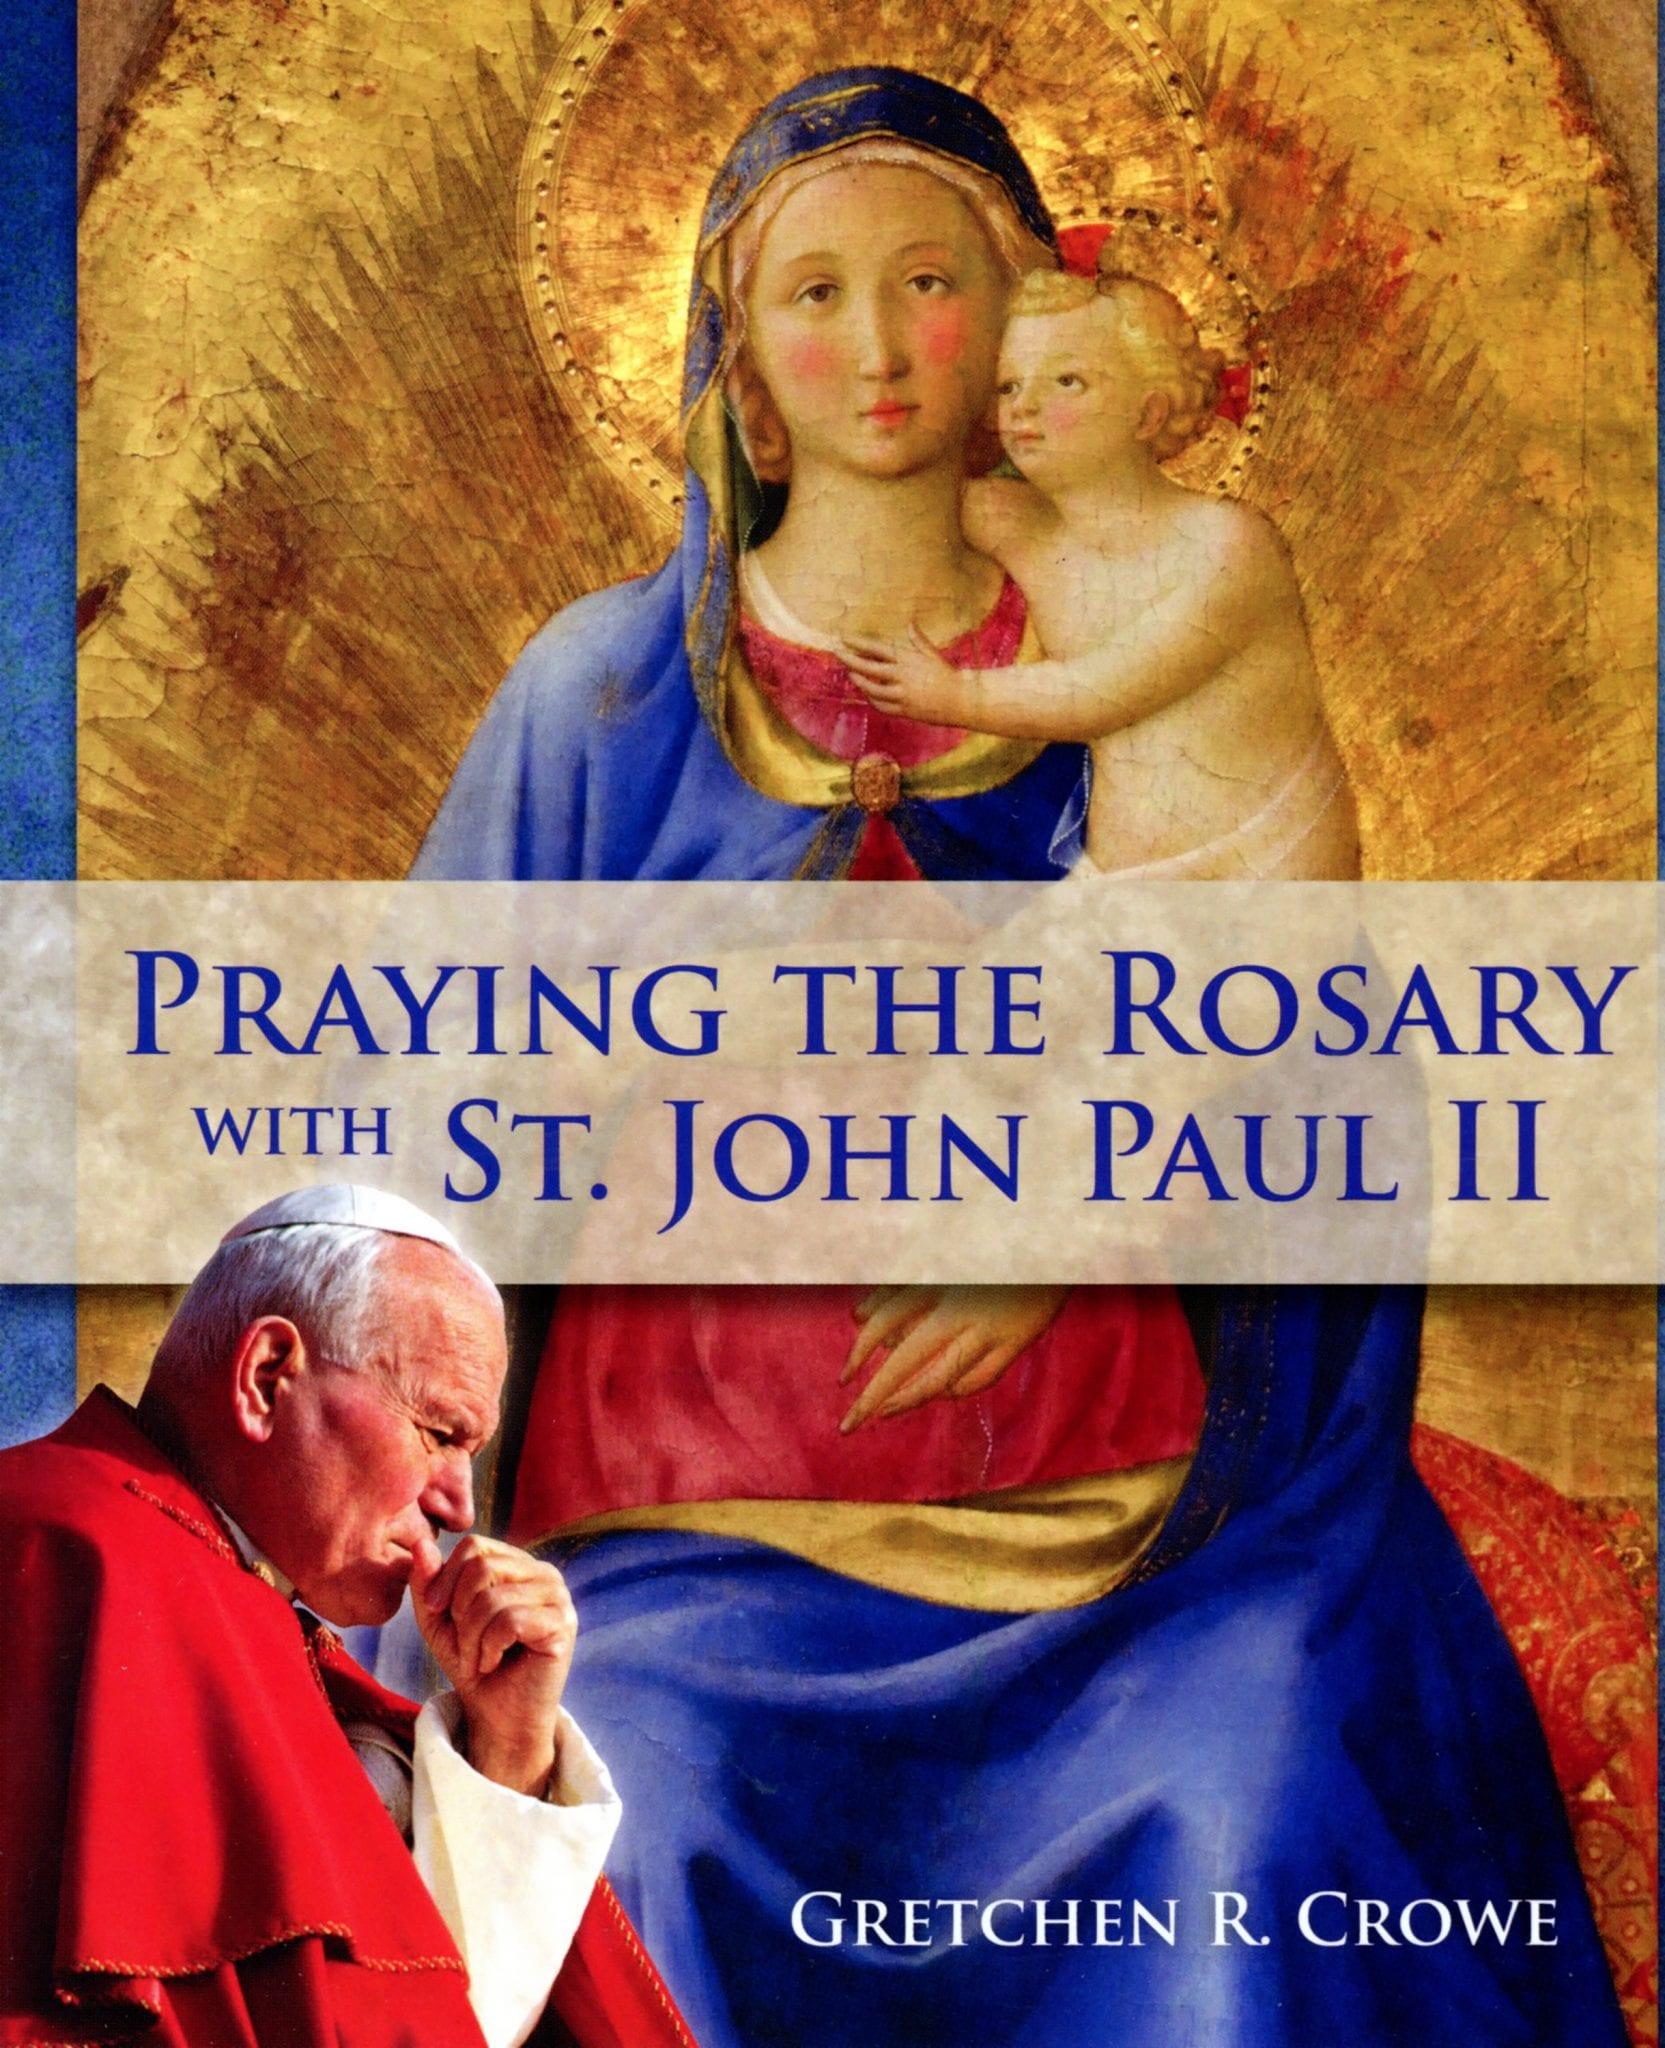 New book on the rosary highlights St. John Paul II’s devotion to it